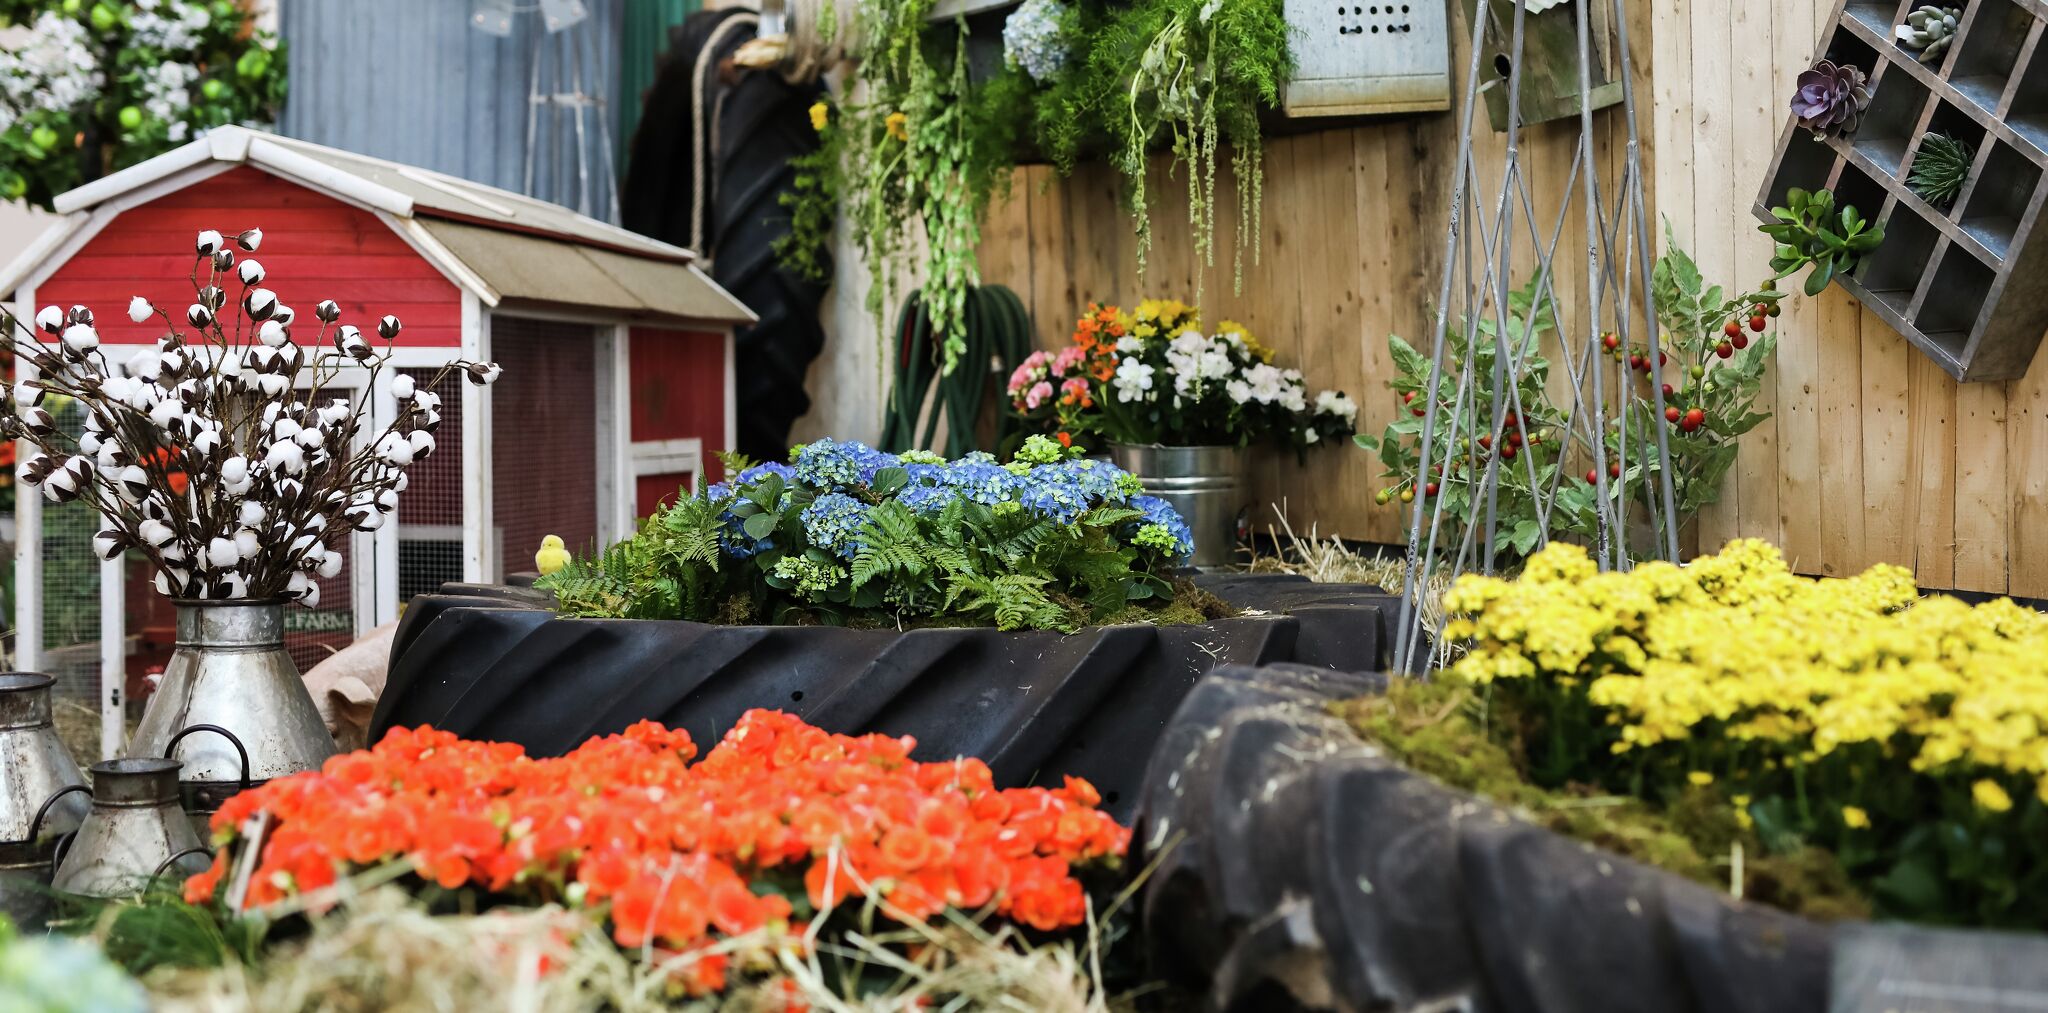 Things to know about the Home + Garden Show in San Antonio